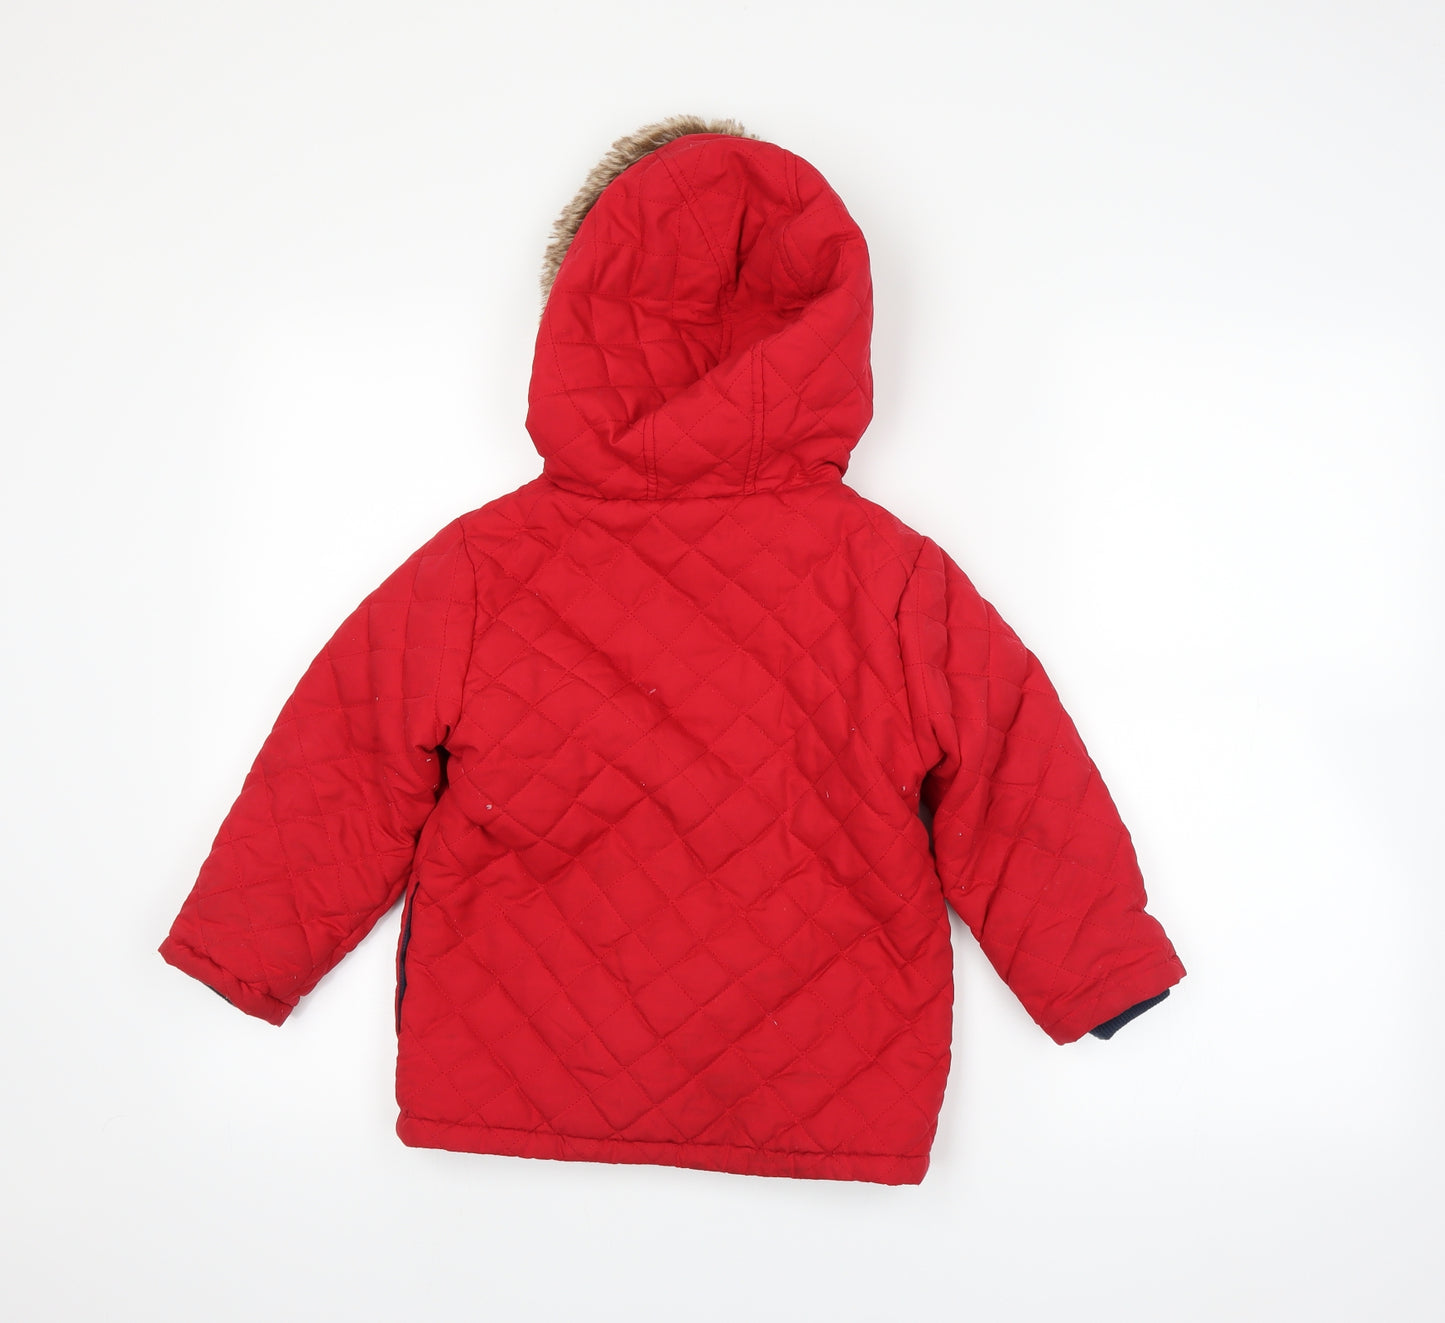 George Girls Red   Parka Coat Size S